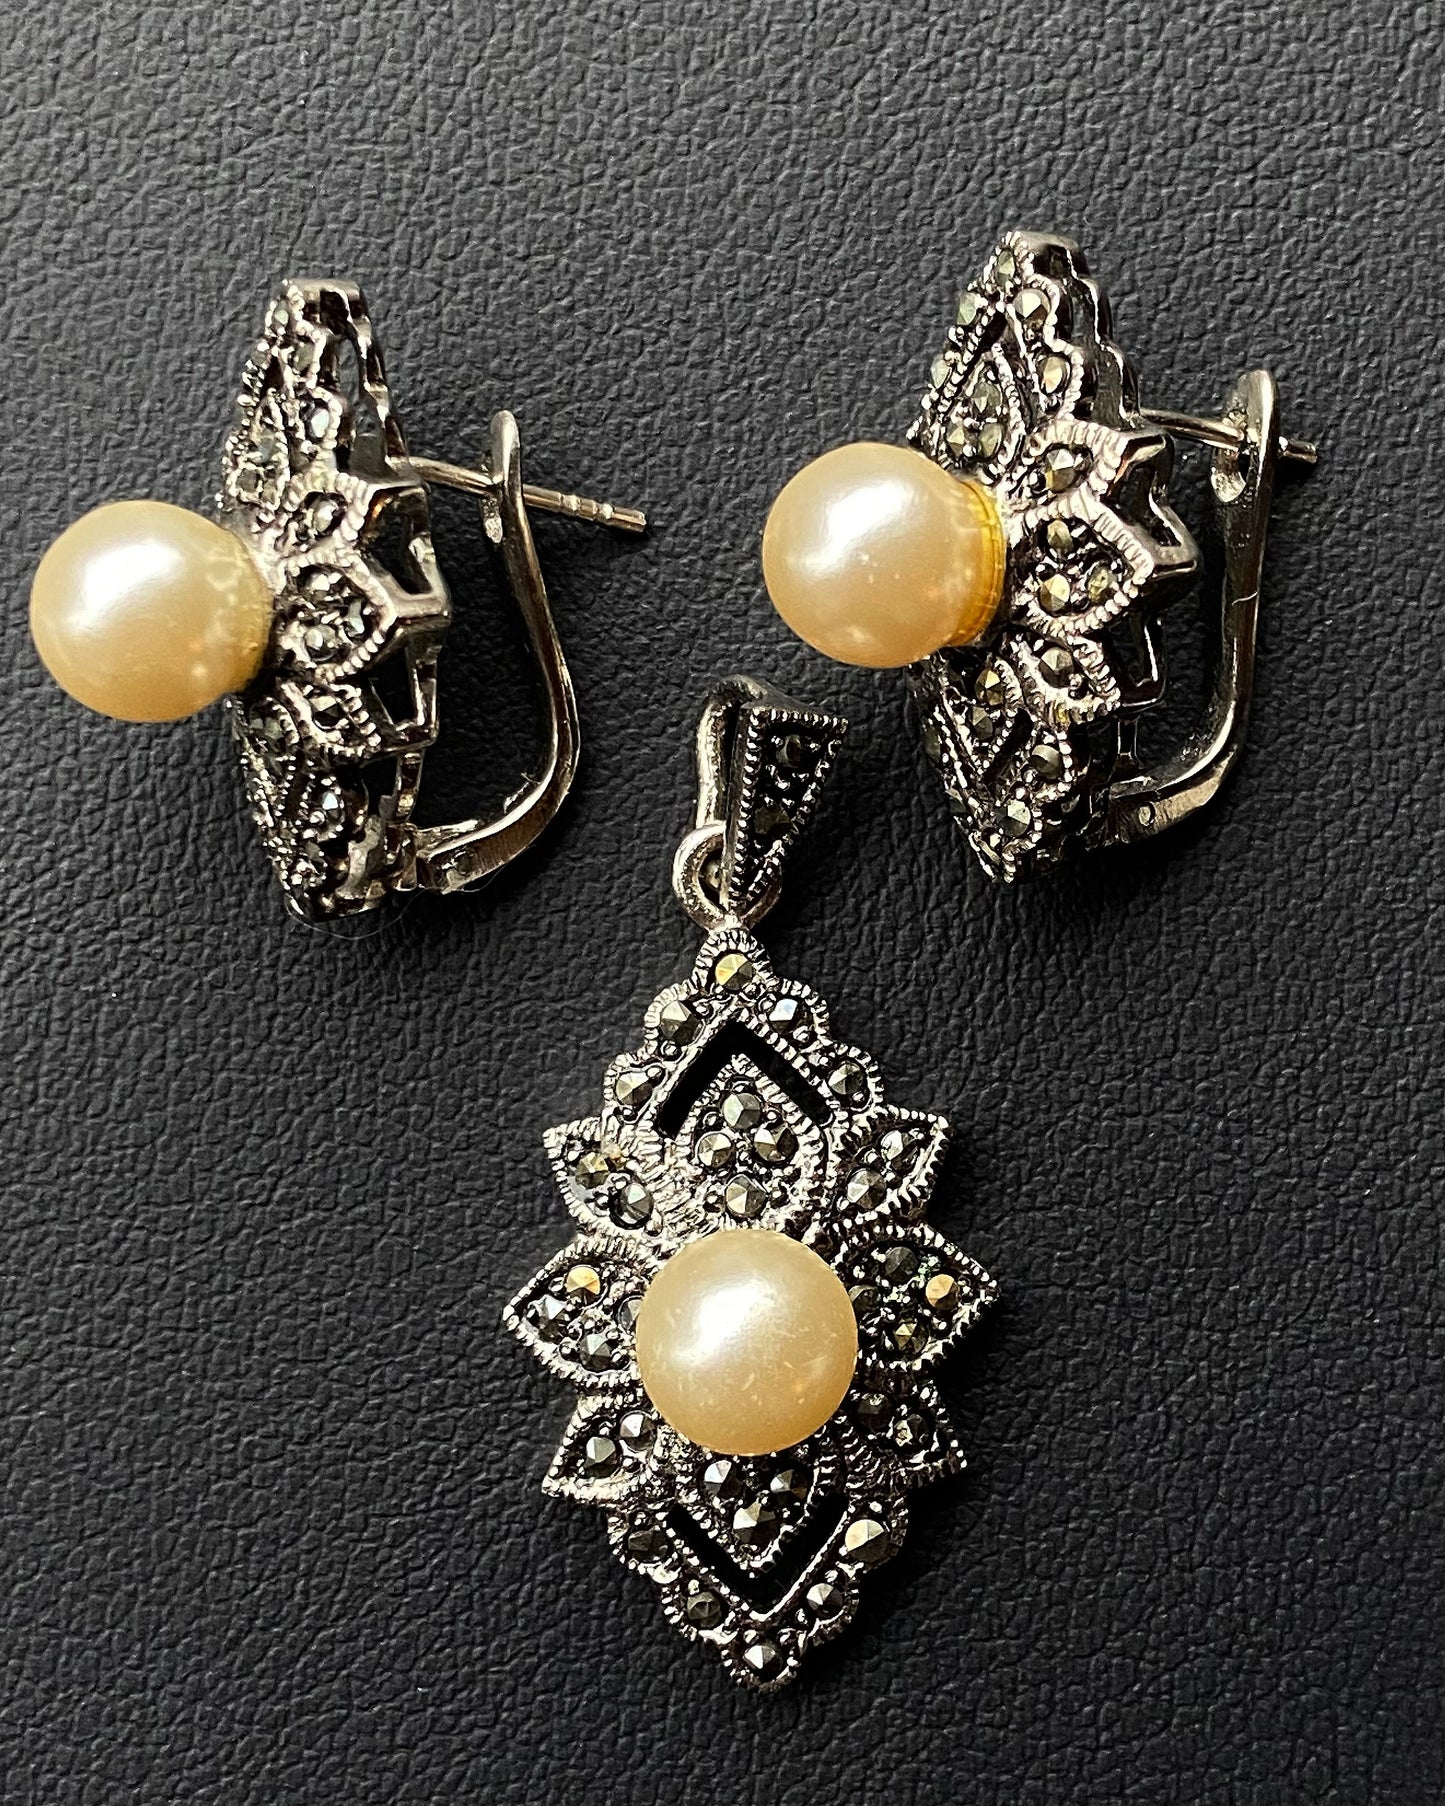 LEAF SET- Marcasite Stones and Shell Pearls